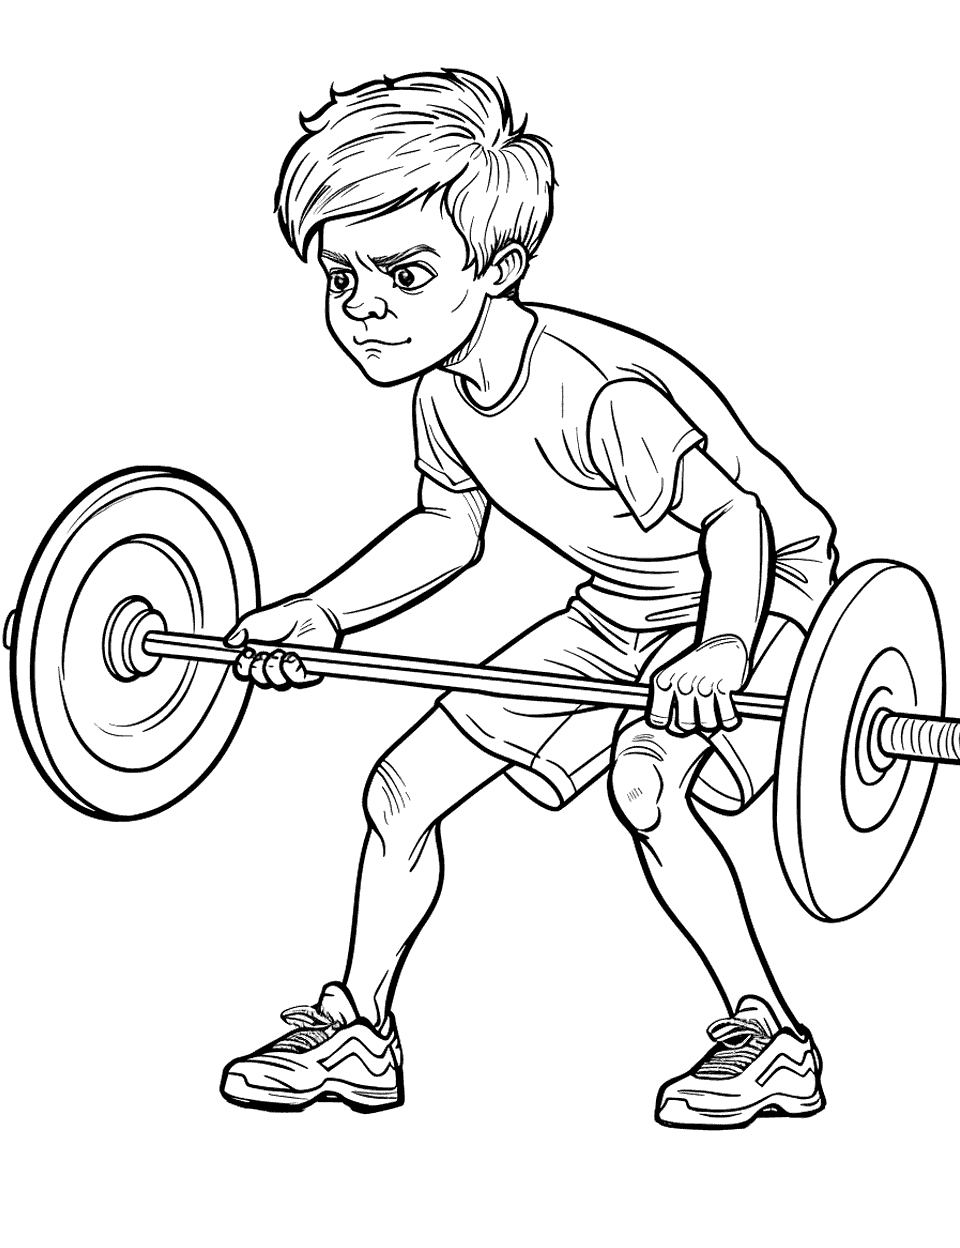 Powerlifting Determination Sports Coloring Page - A powerlifter lifting a heavy barbell with focus and determination.